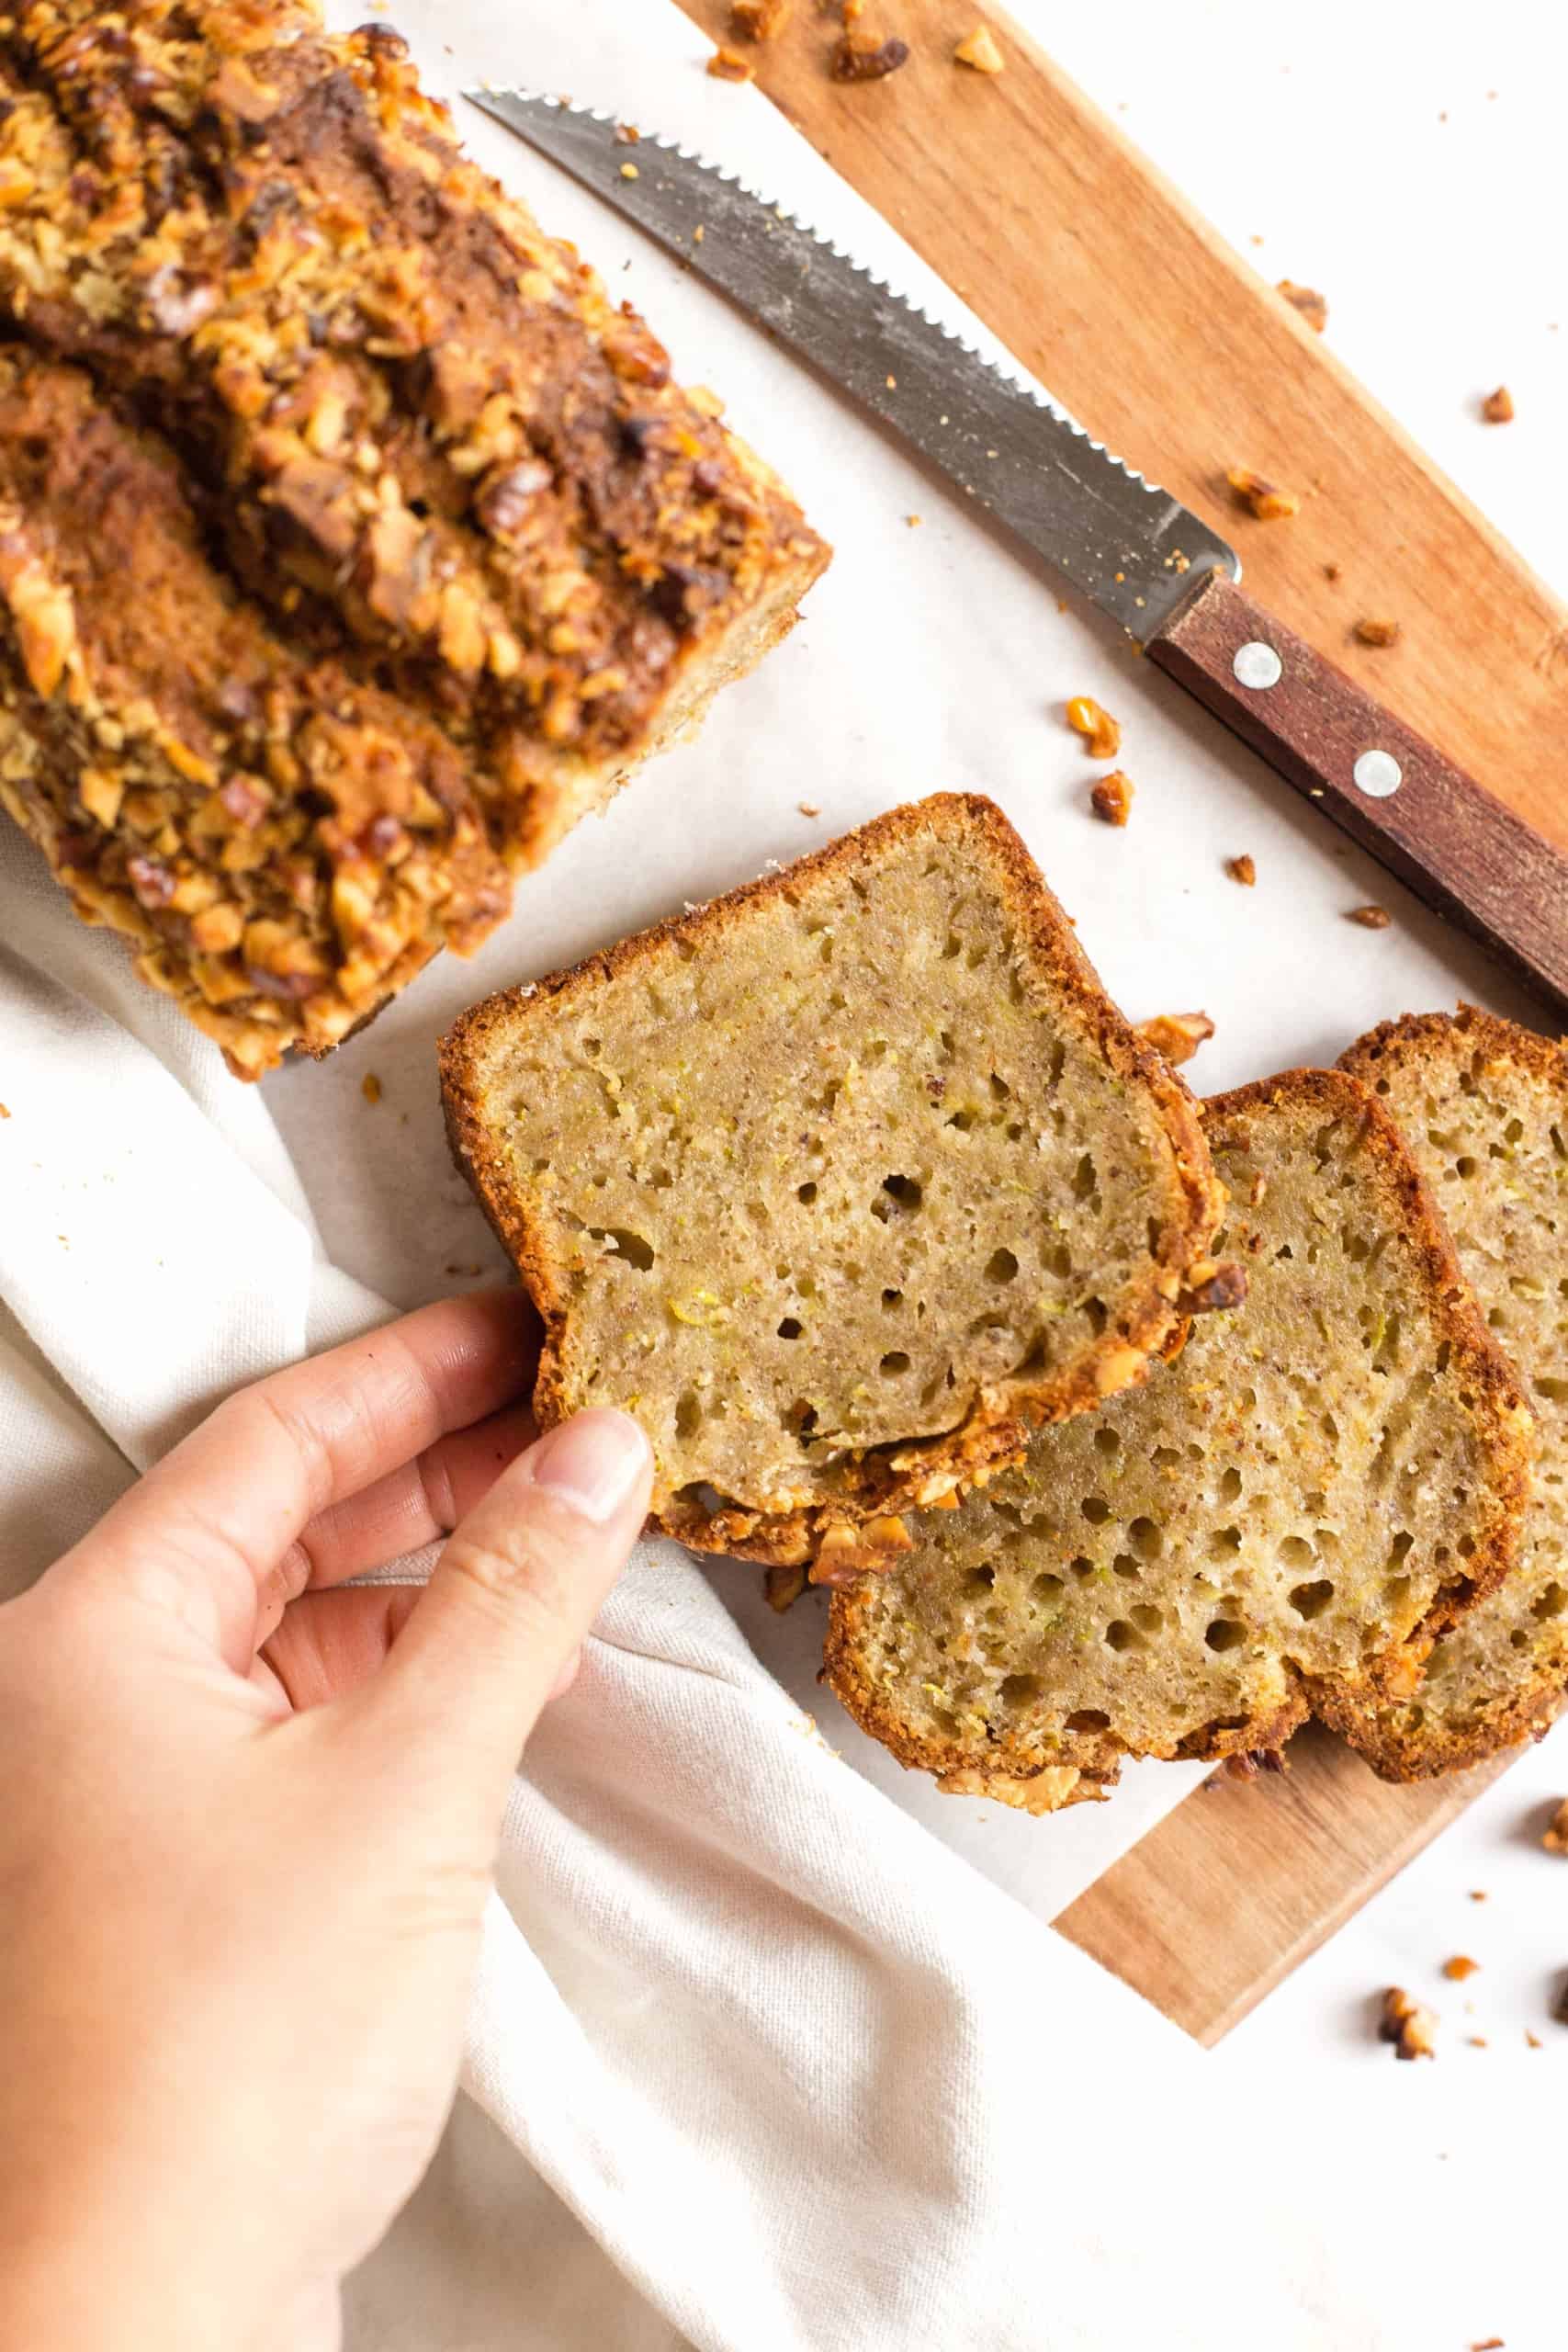 Reaching for a slice of gluten-free zucchini bread from a wooden board.